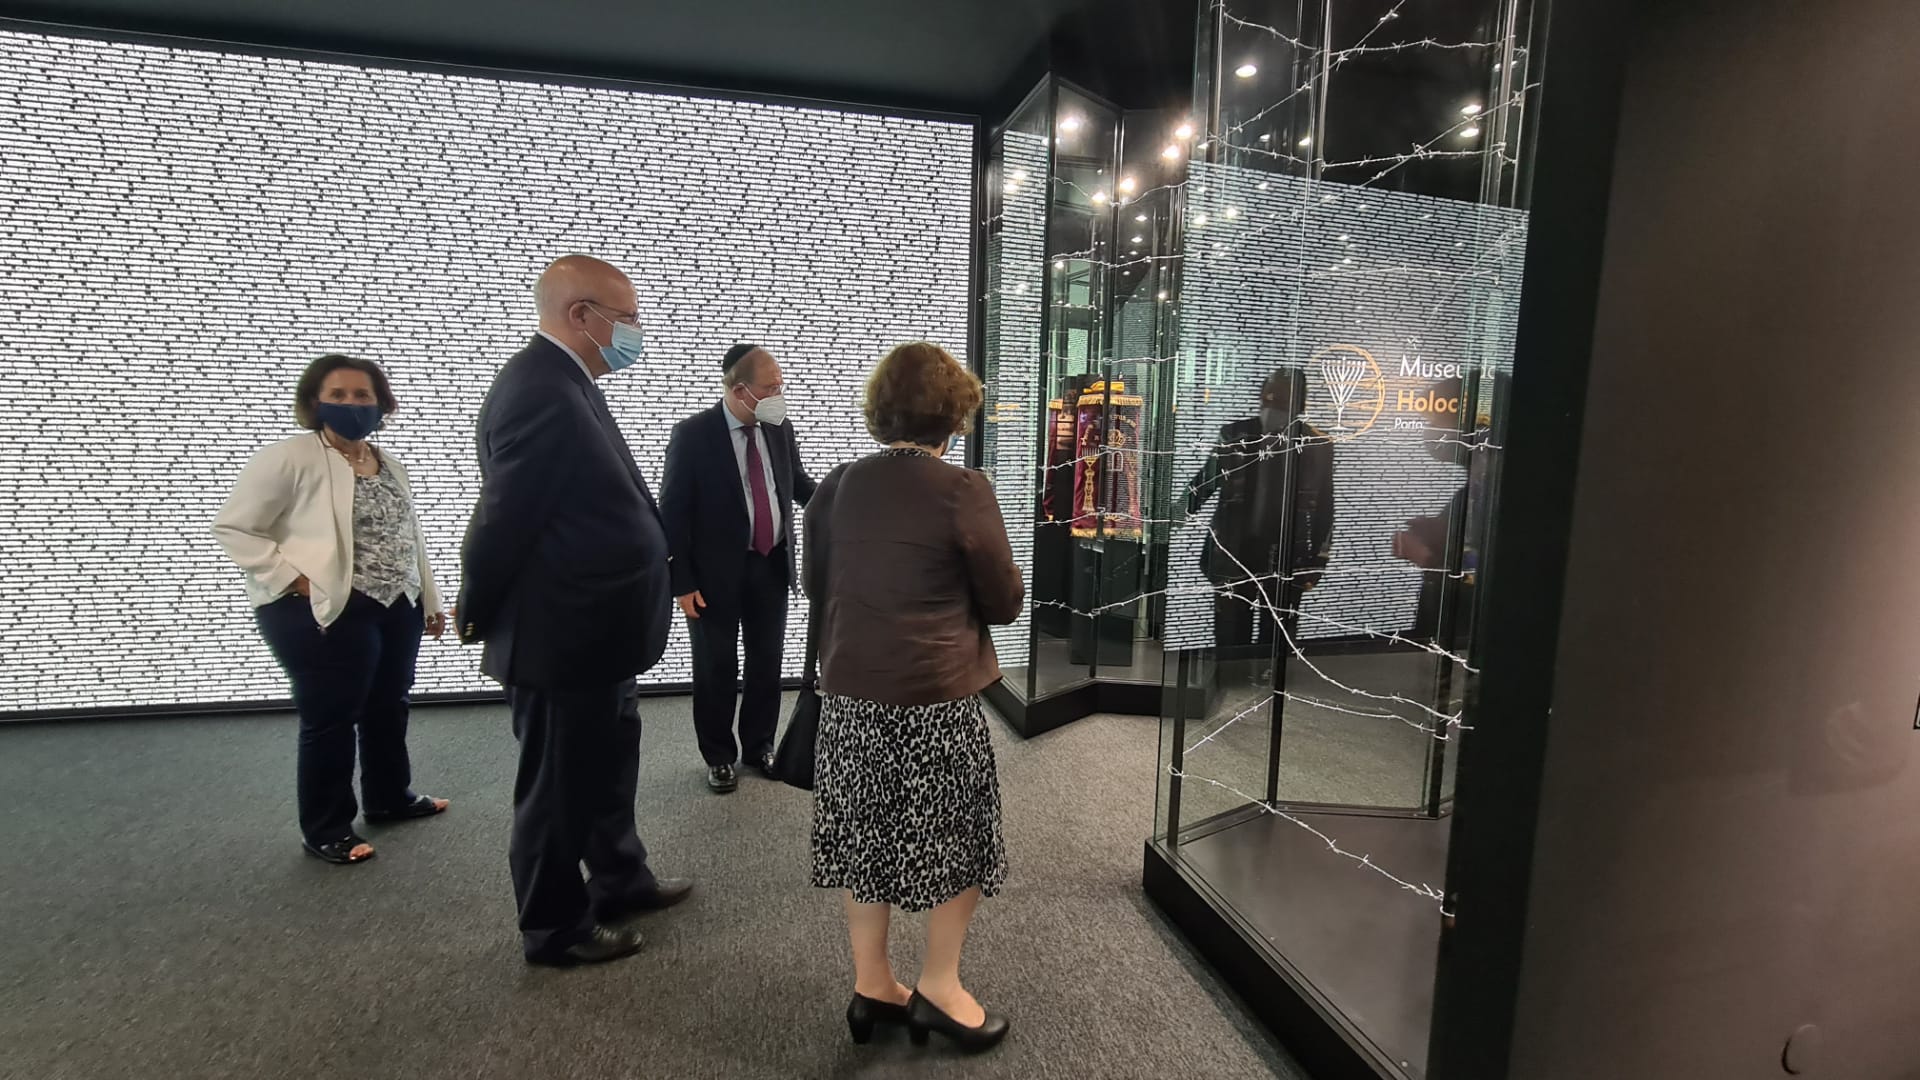 Oporto Holocaust Museum: Visits by the Portuguese Minister of State and by representatives of the US Embassy were the most significant in 2021